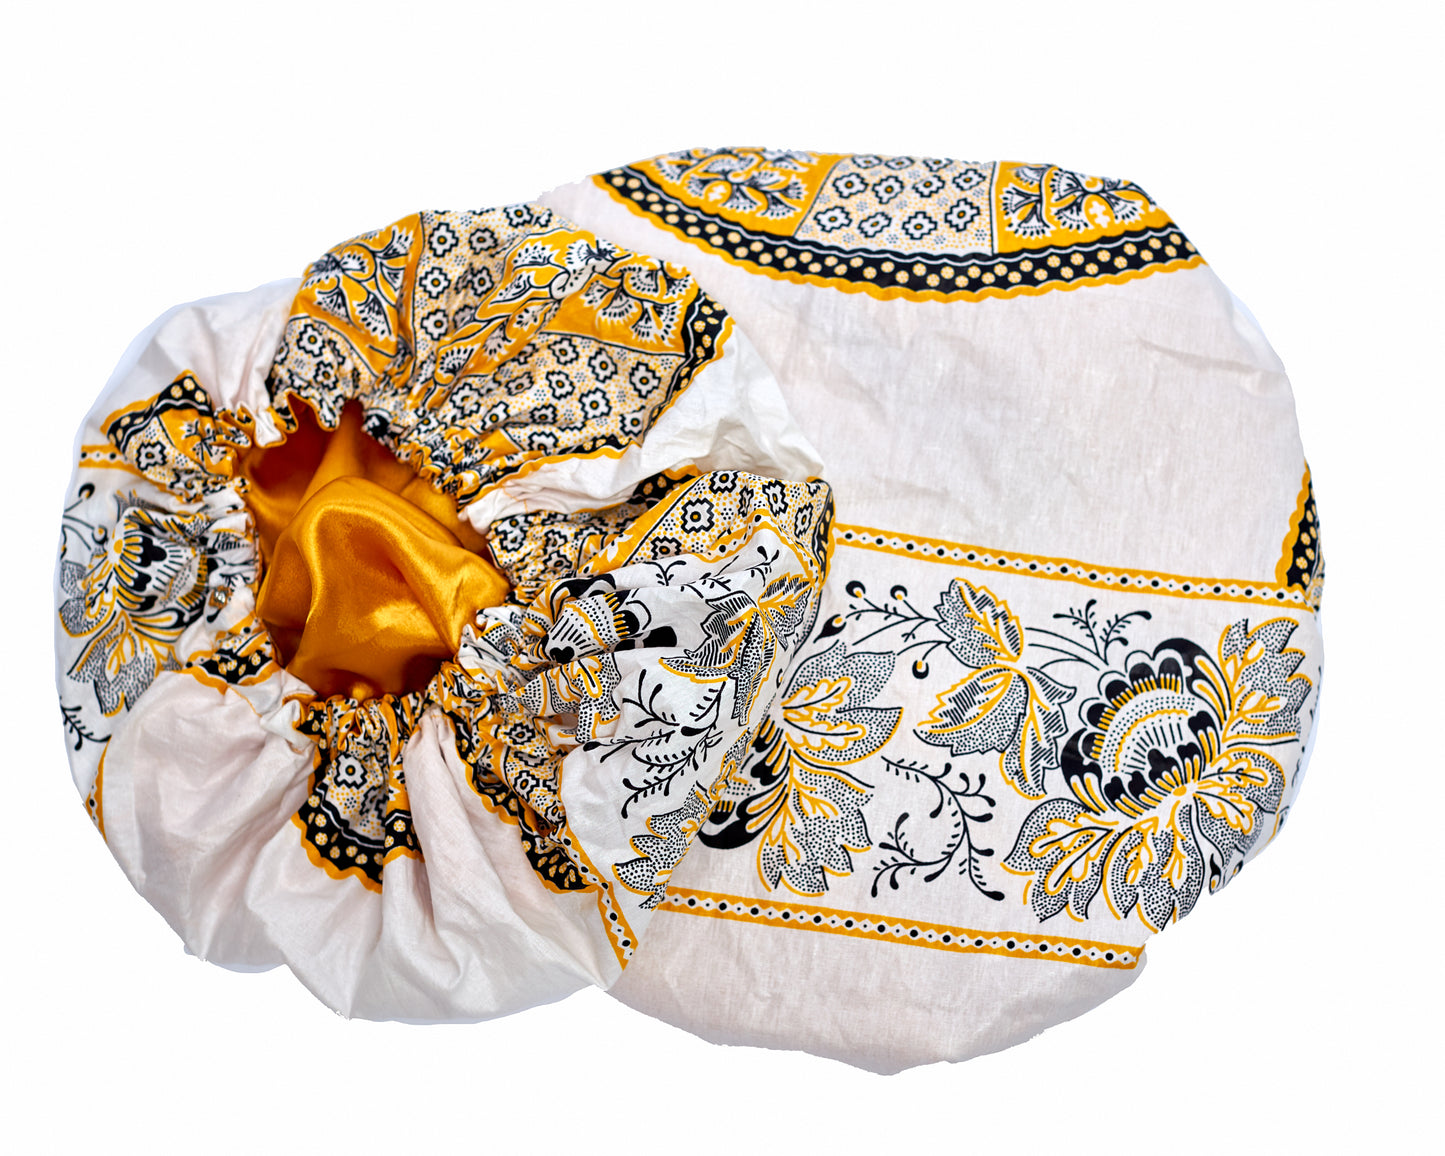 Ankara Wax Print Made of  Black White, Yellow Blend of Beautiful Colours And Pattern, Hand Made Elastic With Yellow Silk lined Hair Bonnet